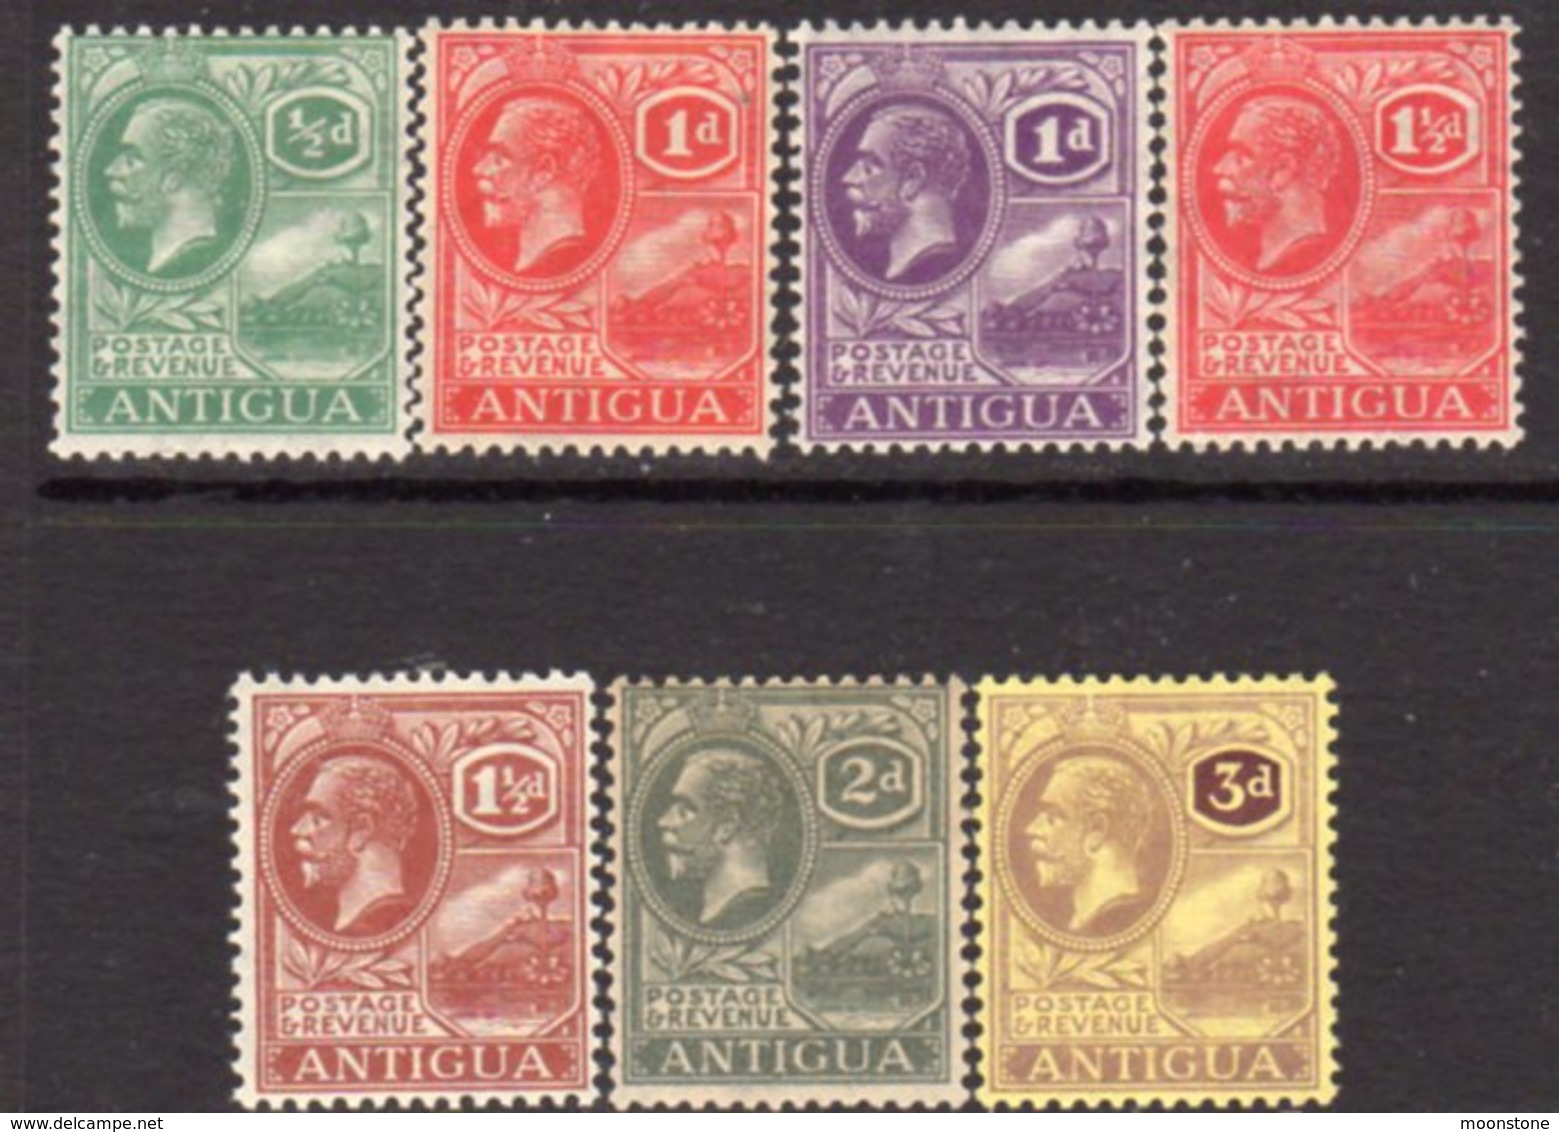 Antigua GV 1921-9 Group Of 7 Definitives To 3d, Wmk, Mult. Script CA, Hinged Mint, SG 62/74 - 1858-1960 Crown Colony